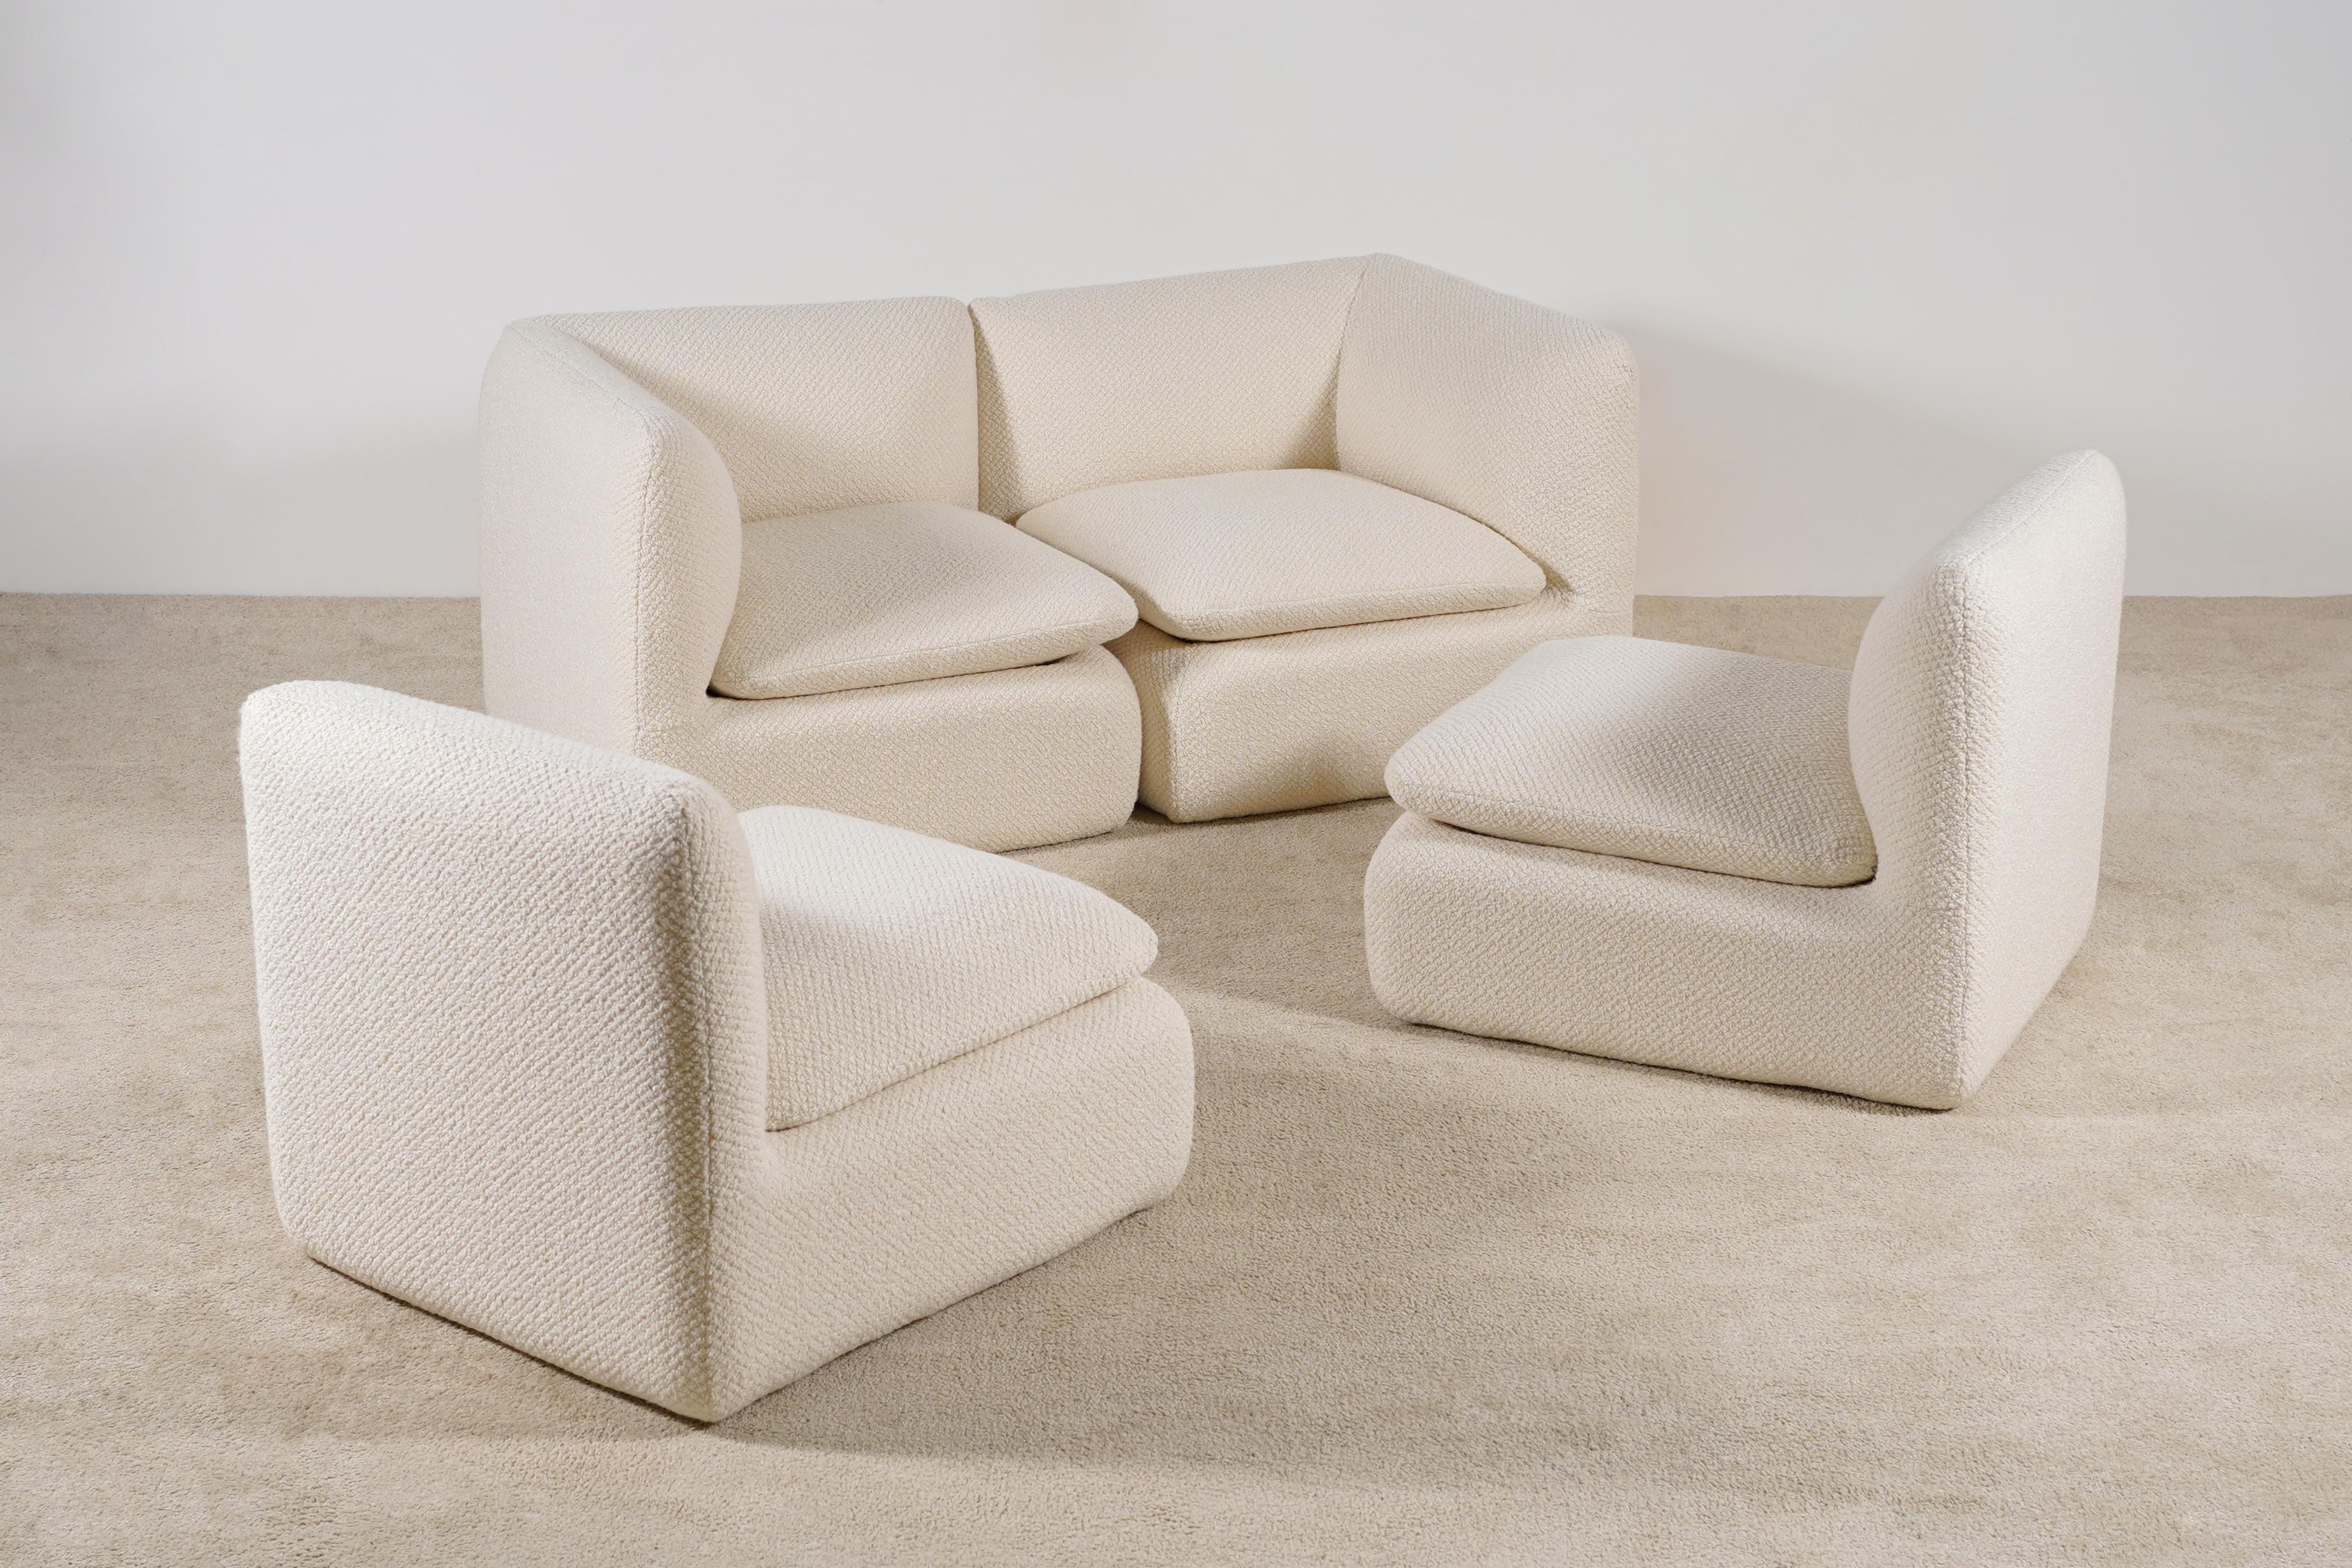 French Airborne, Sectional Sofa Composed of 4 Modular Lounge Chairs, France, 1970s